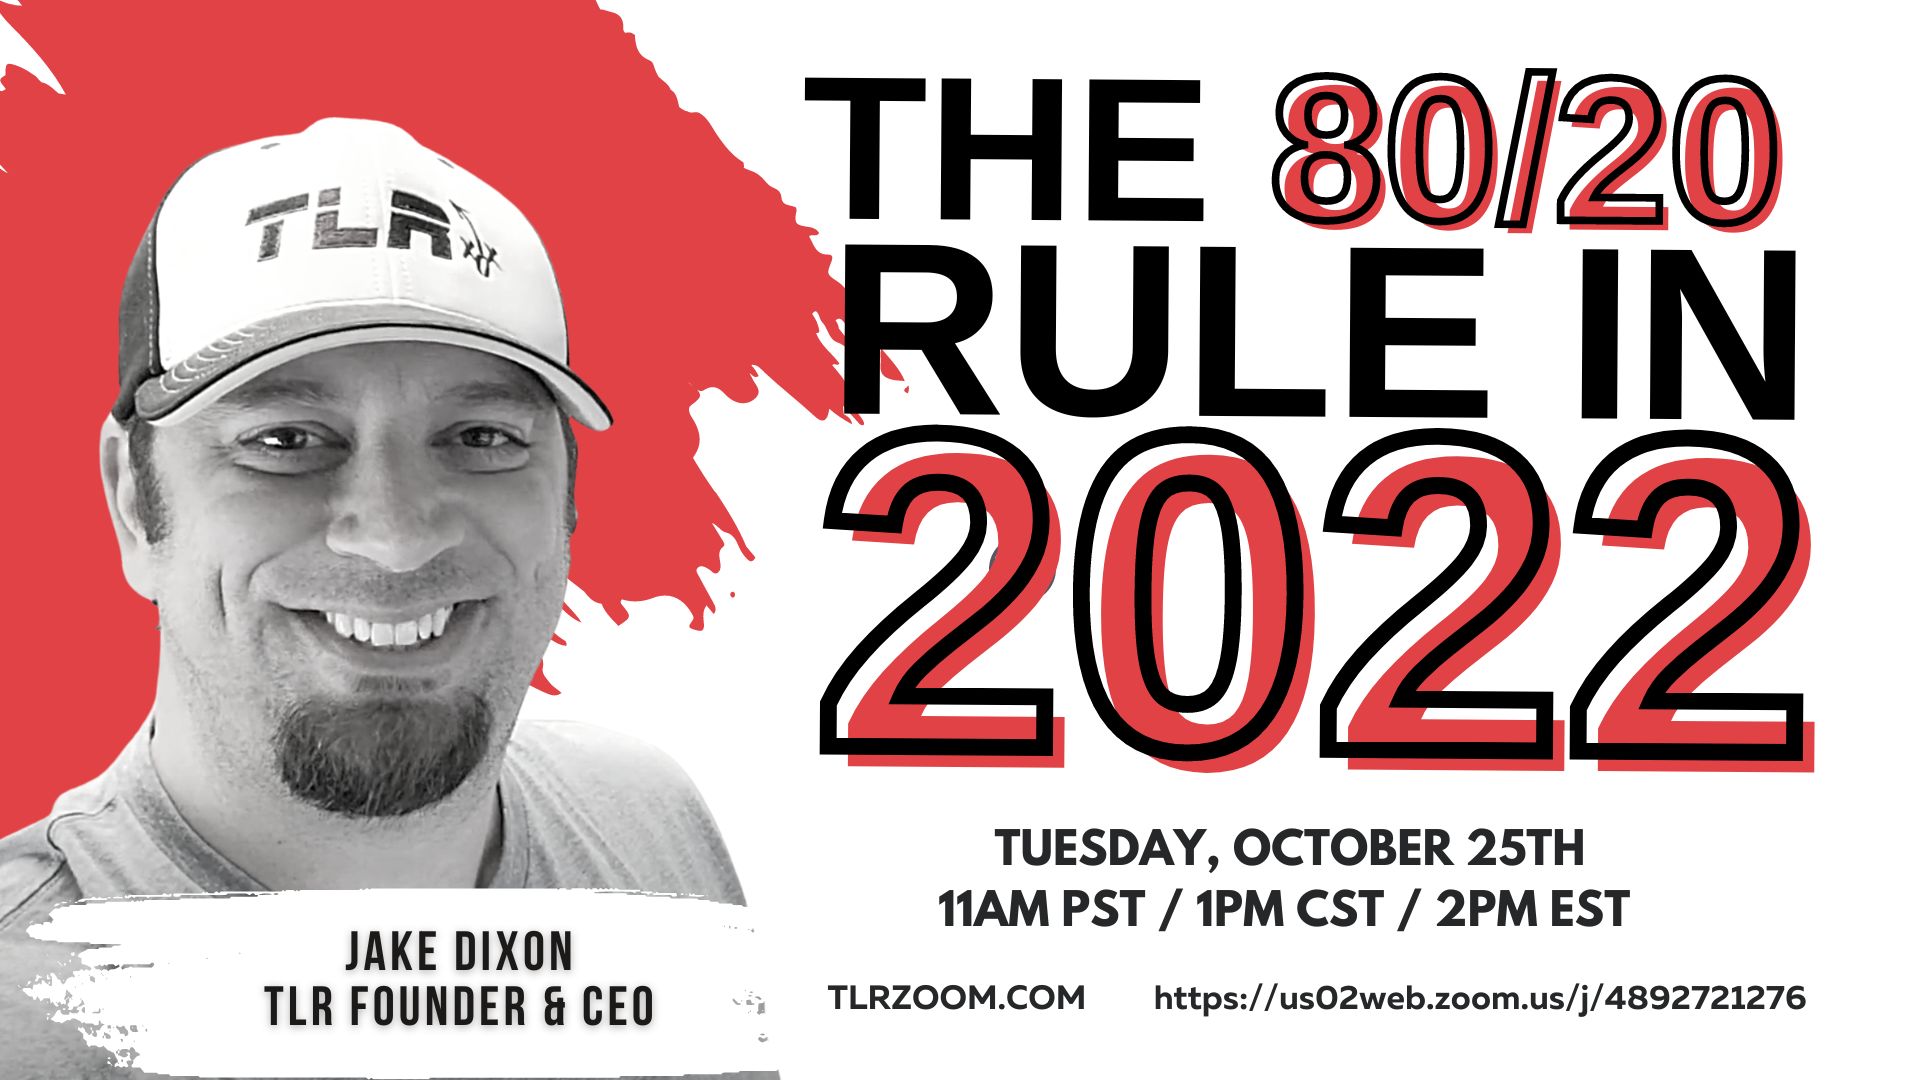 
TLR: the 80/20 RULE IN 2022